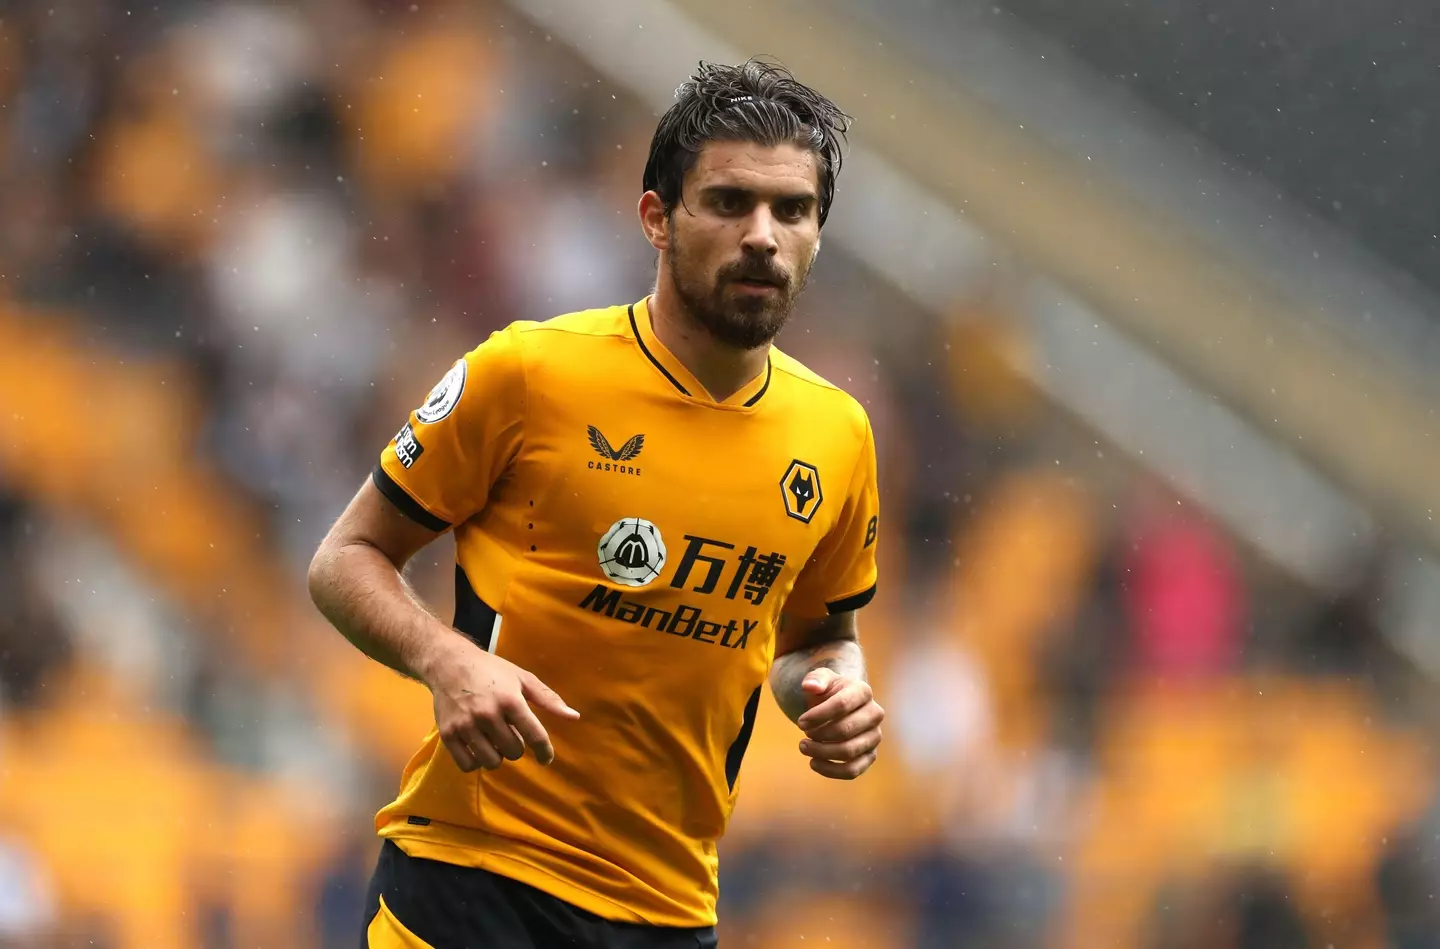 Neves has made 194 appearances for Wolves since joining the club in 2017 (Image credit: Alamy)